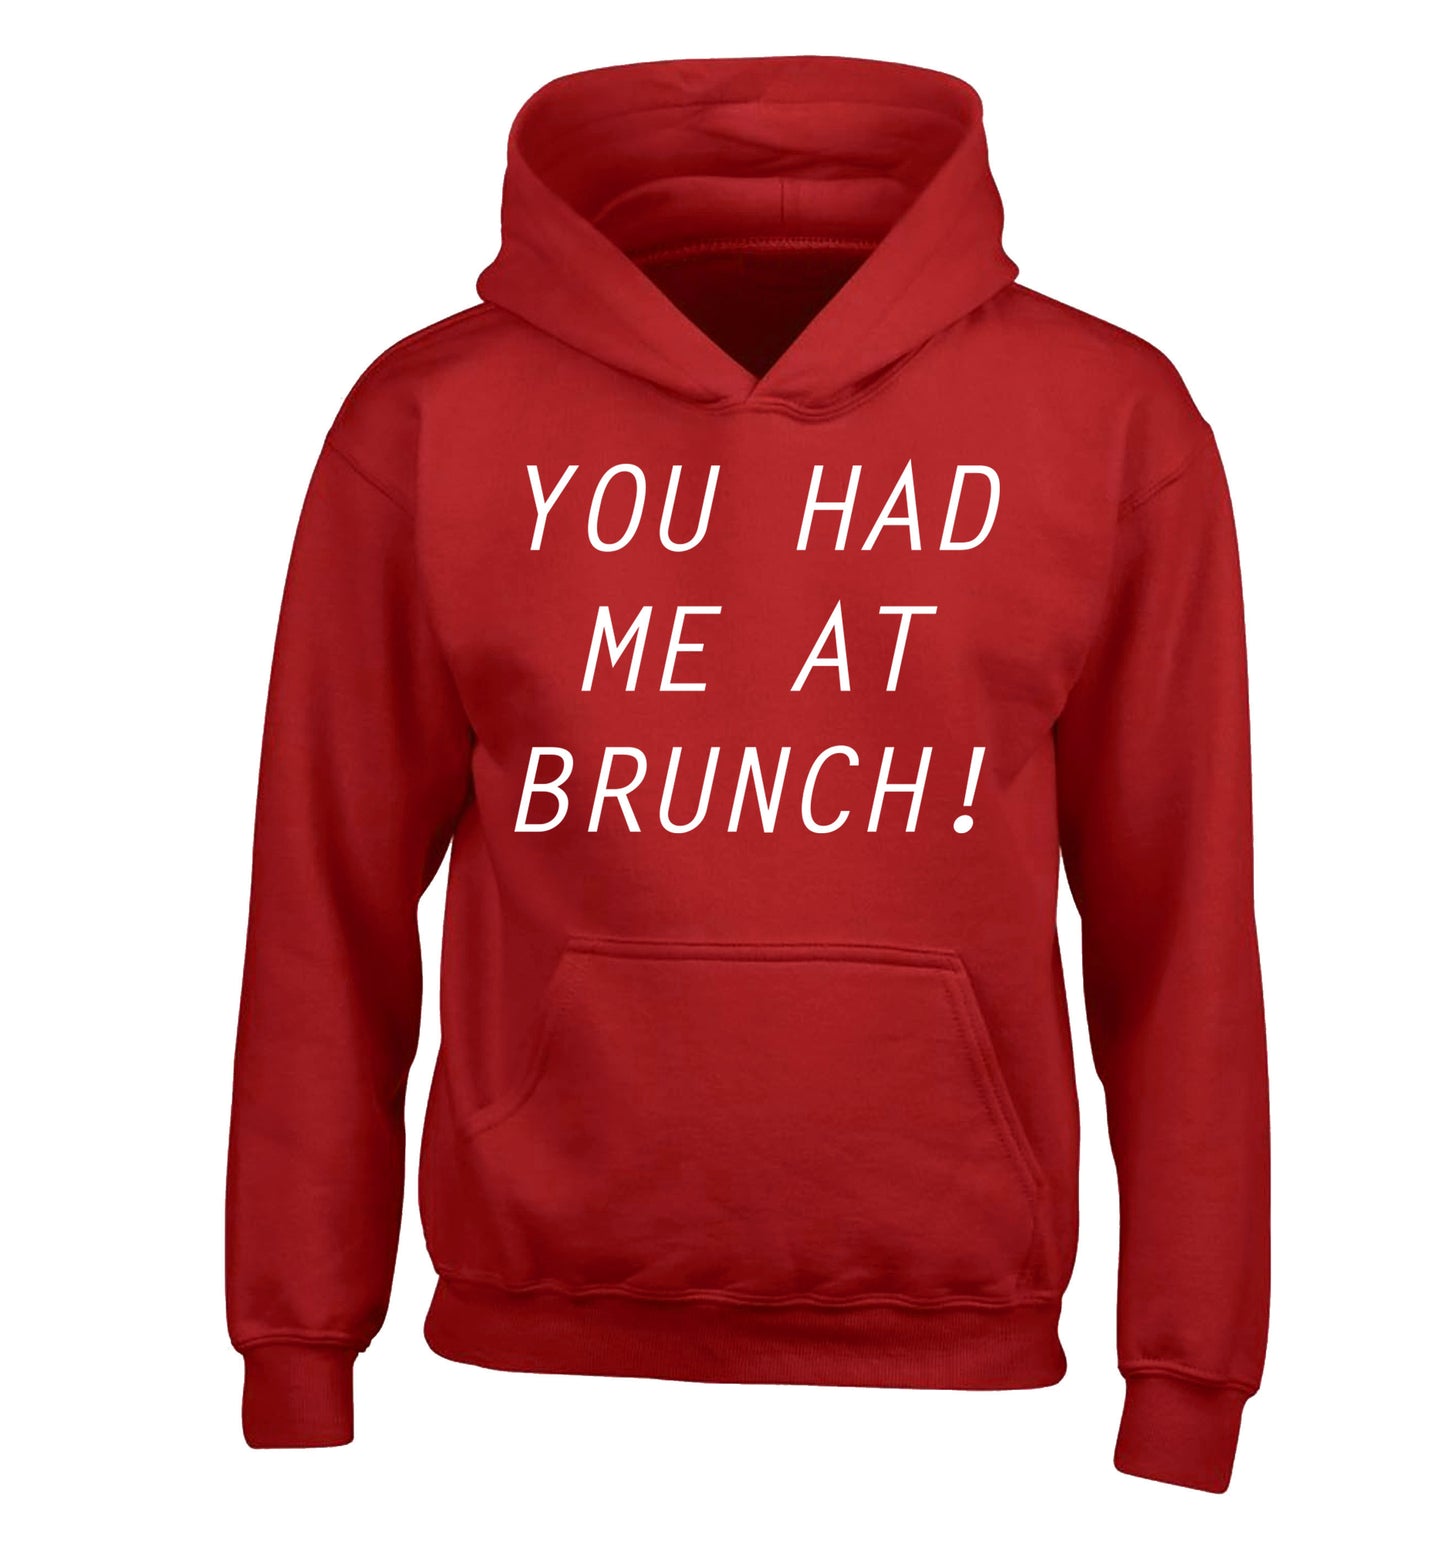 You had me at brunch children's pink sweater 12-14 Years